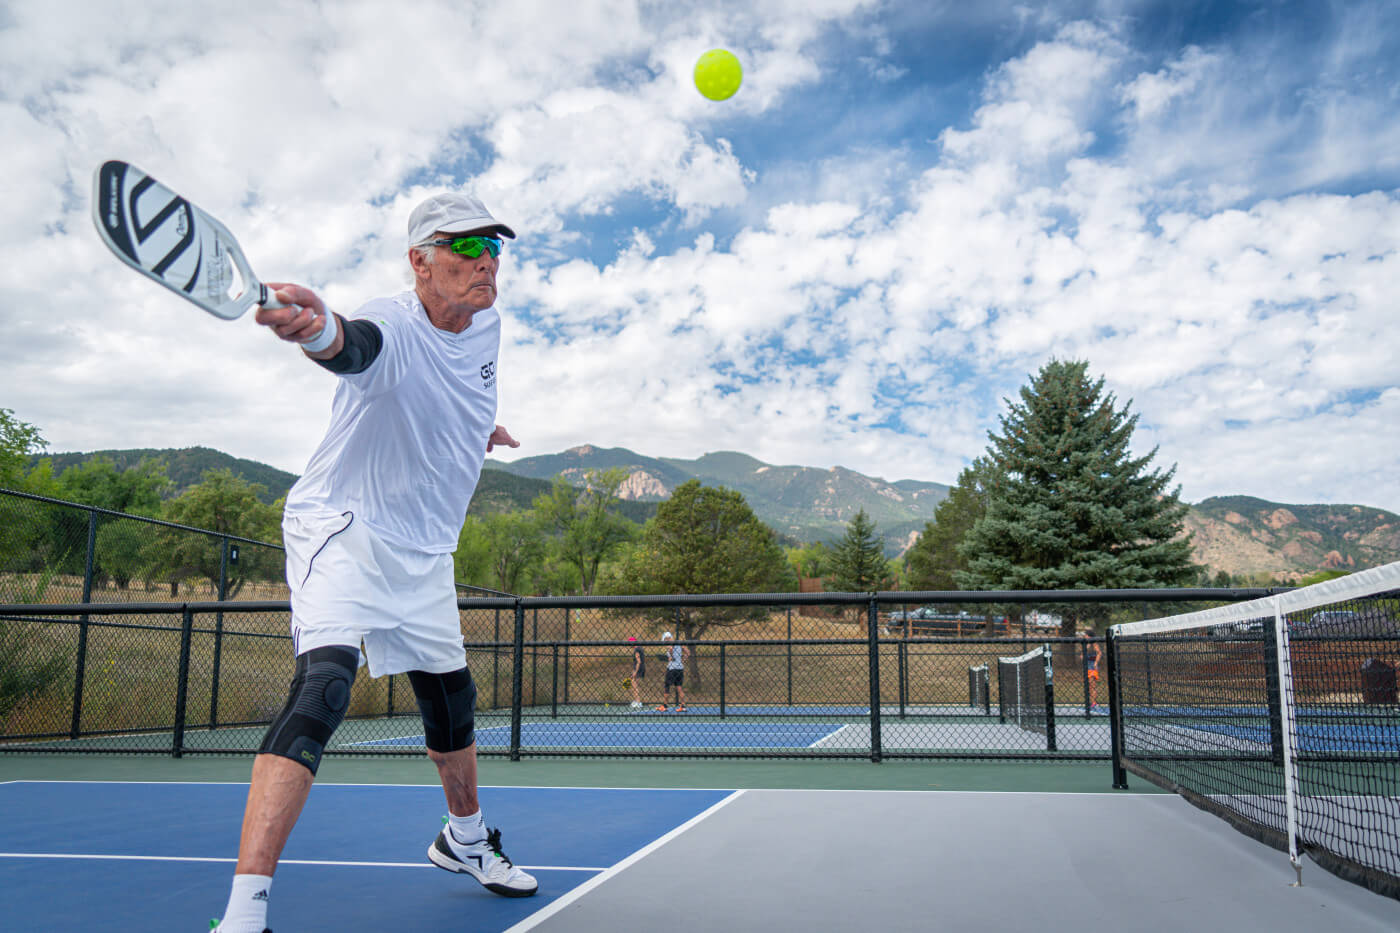 Former NFL Player Rick Barry, competing in his new favorite sport, Pickleball with his GO Sleeves knee sleeves